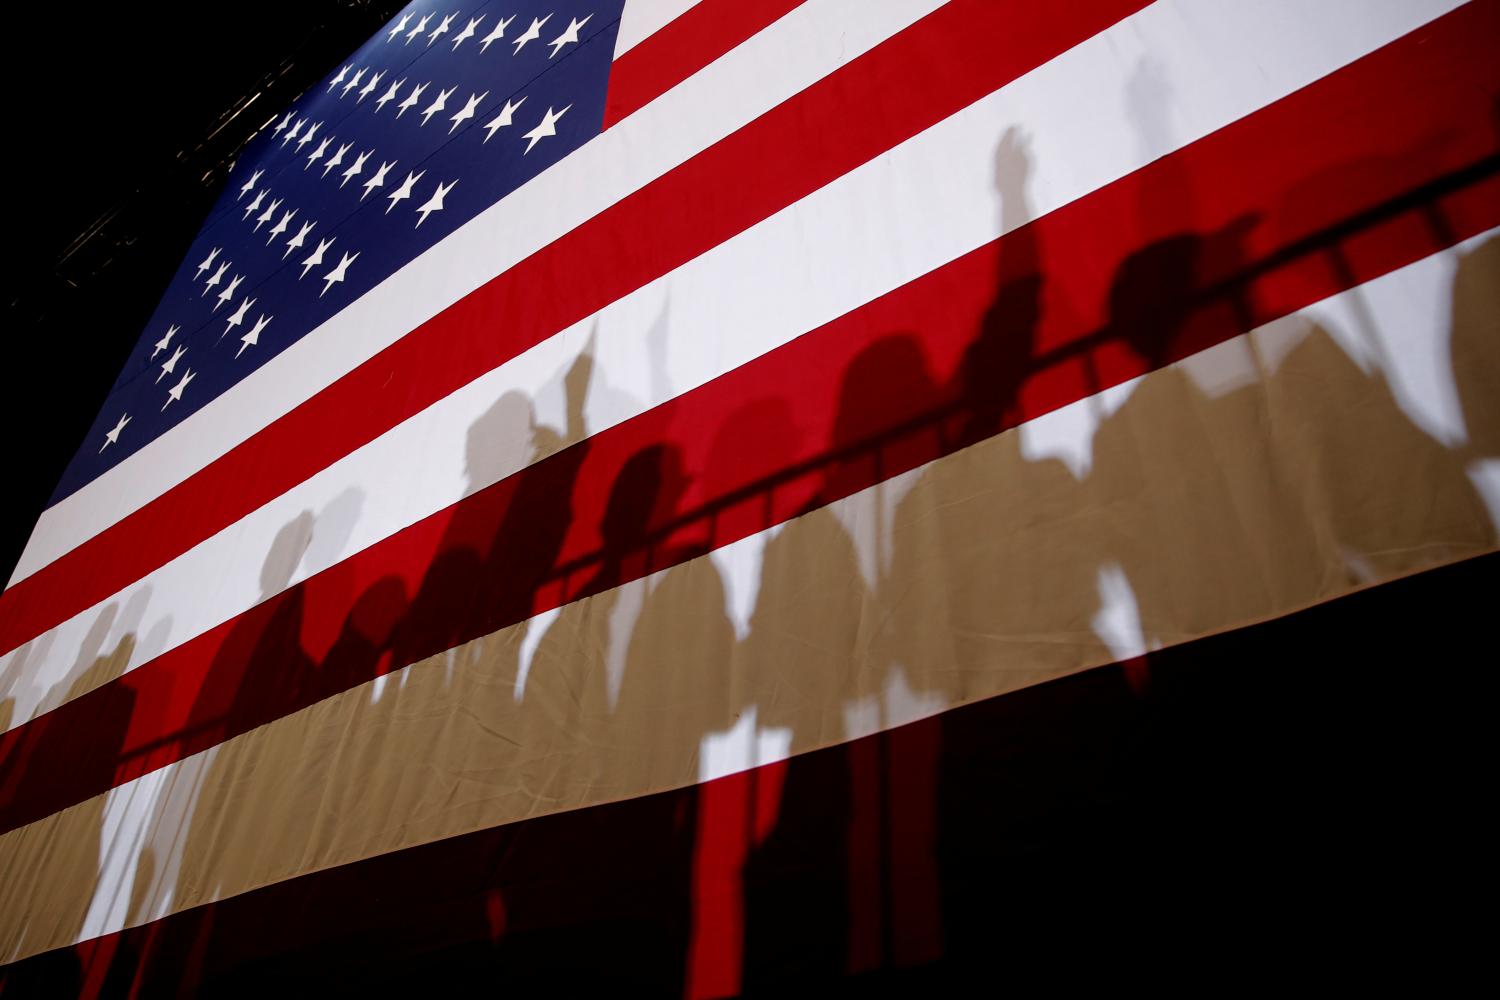 The shadows of supporters of U.S. President Donald Trump  are seen on an American Flag at a campaign rally in Las Vegas, Nevada, U.S., September 20, 2018.  REUTERS/Mike Segar - RC199AD75290